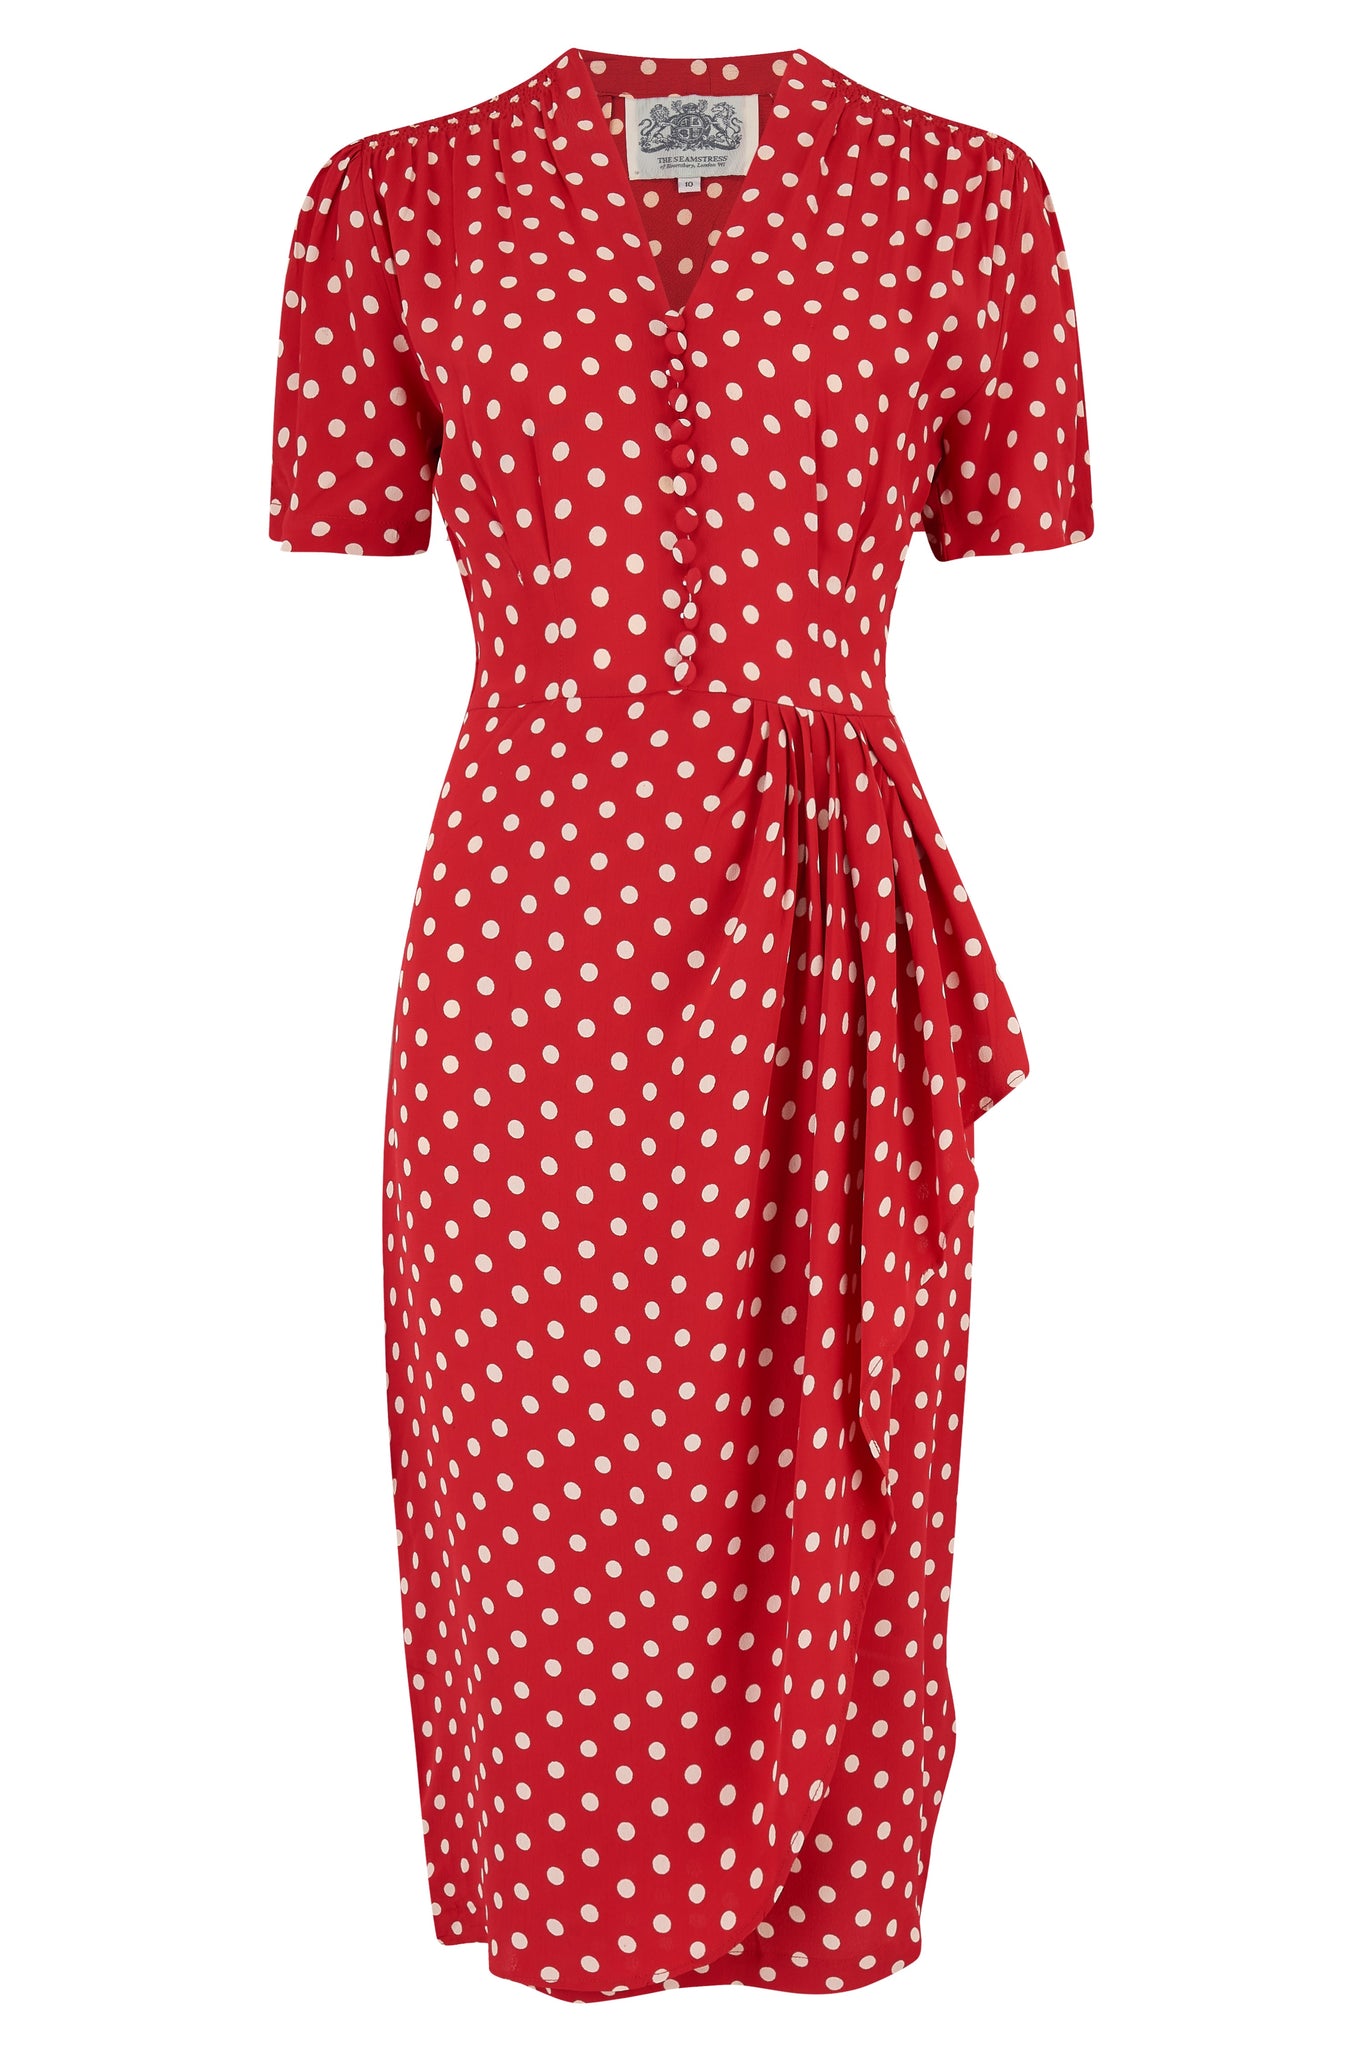 "Mabel" Dress in Red Polka , A Classic 1940s Inspired Vintage Style - True and authentic vintage style clothing, inspired by the Classic styles of CC41 , WW2 and the fun 1950s RocknRoll era, for everyday wear plus events like Goodwood Revival, Twinwood Festival and Viva Las Vegas Rockabilly Weekend Rock n Romance The Seamstress of Bloomsbury